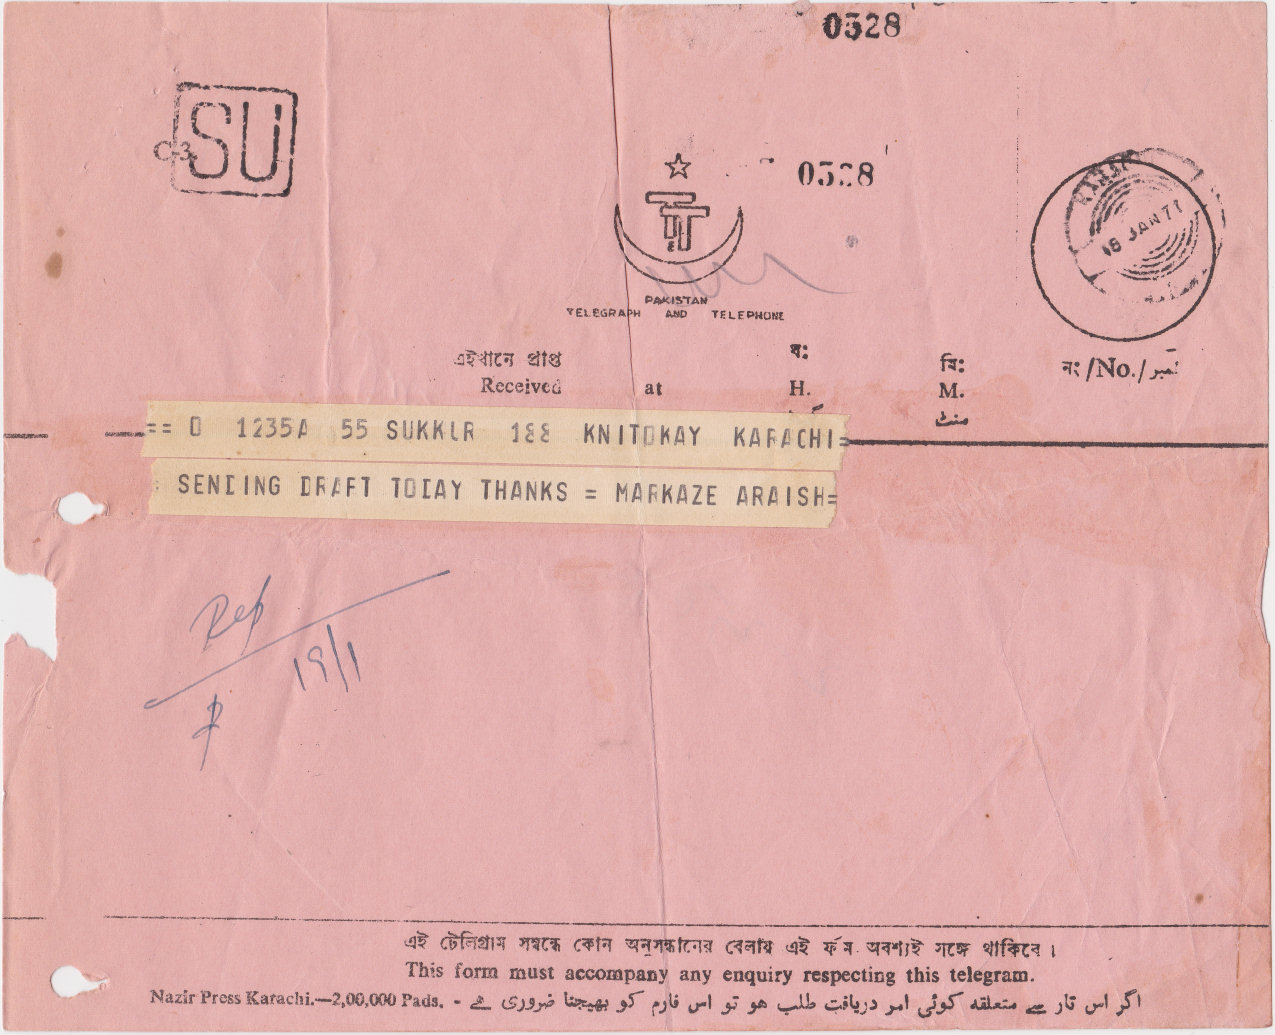 1971 or 77 Telegraph form